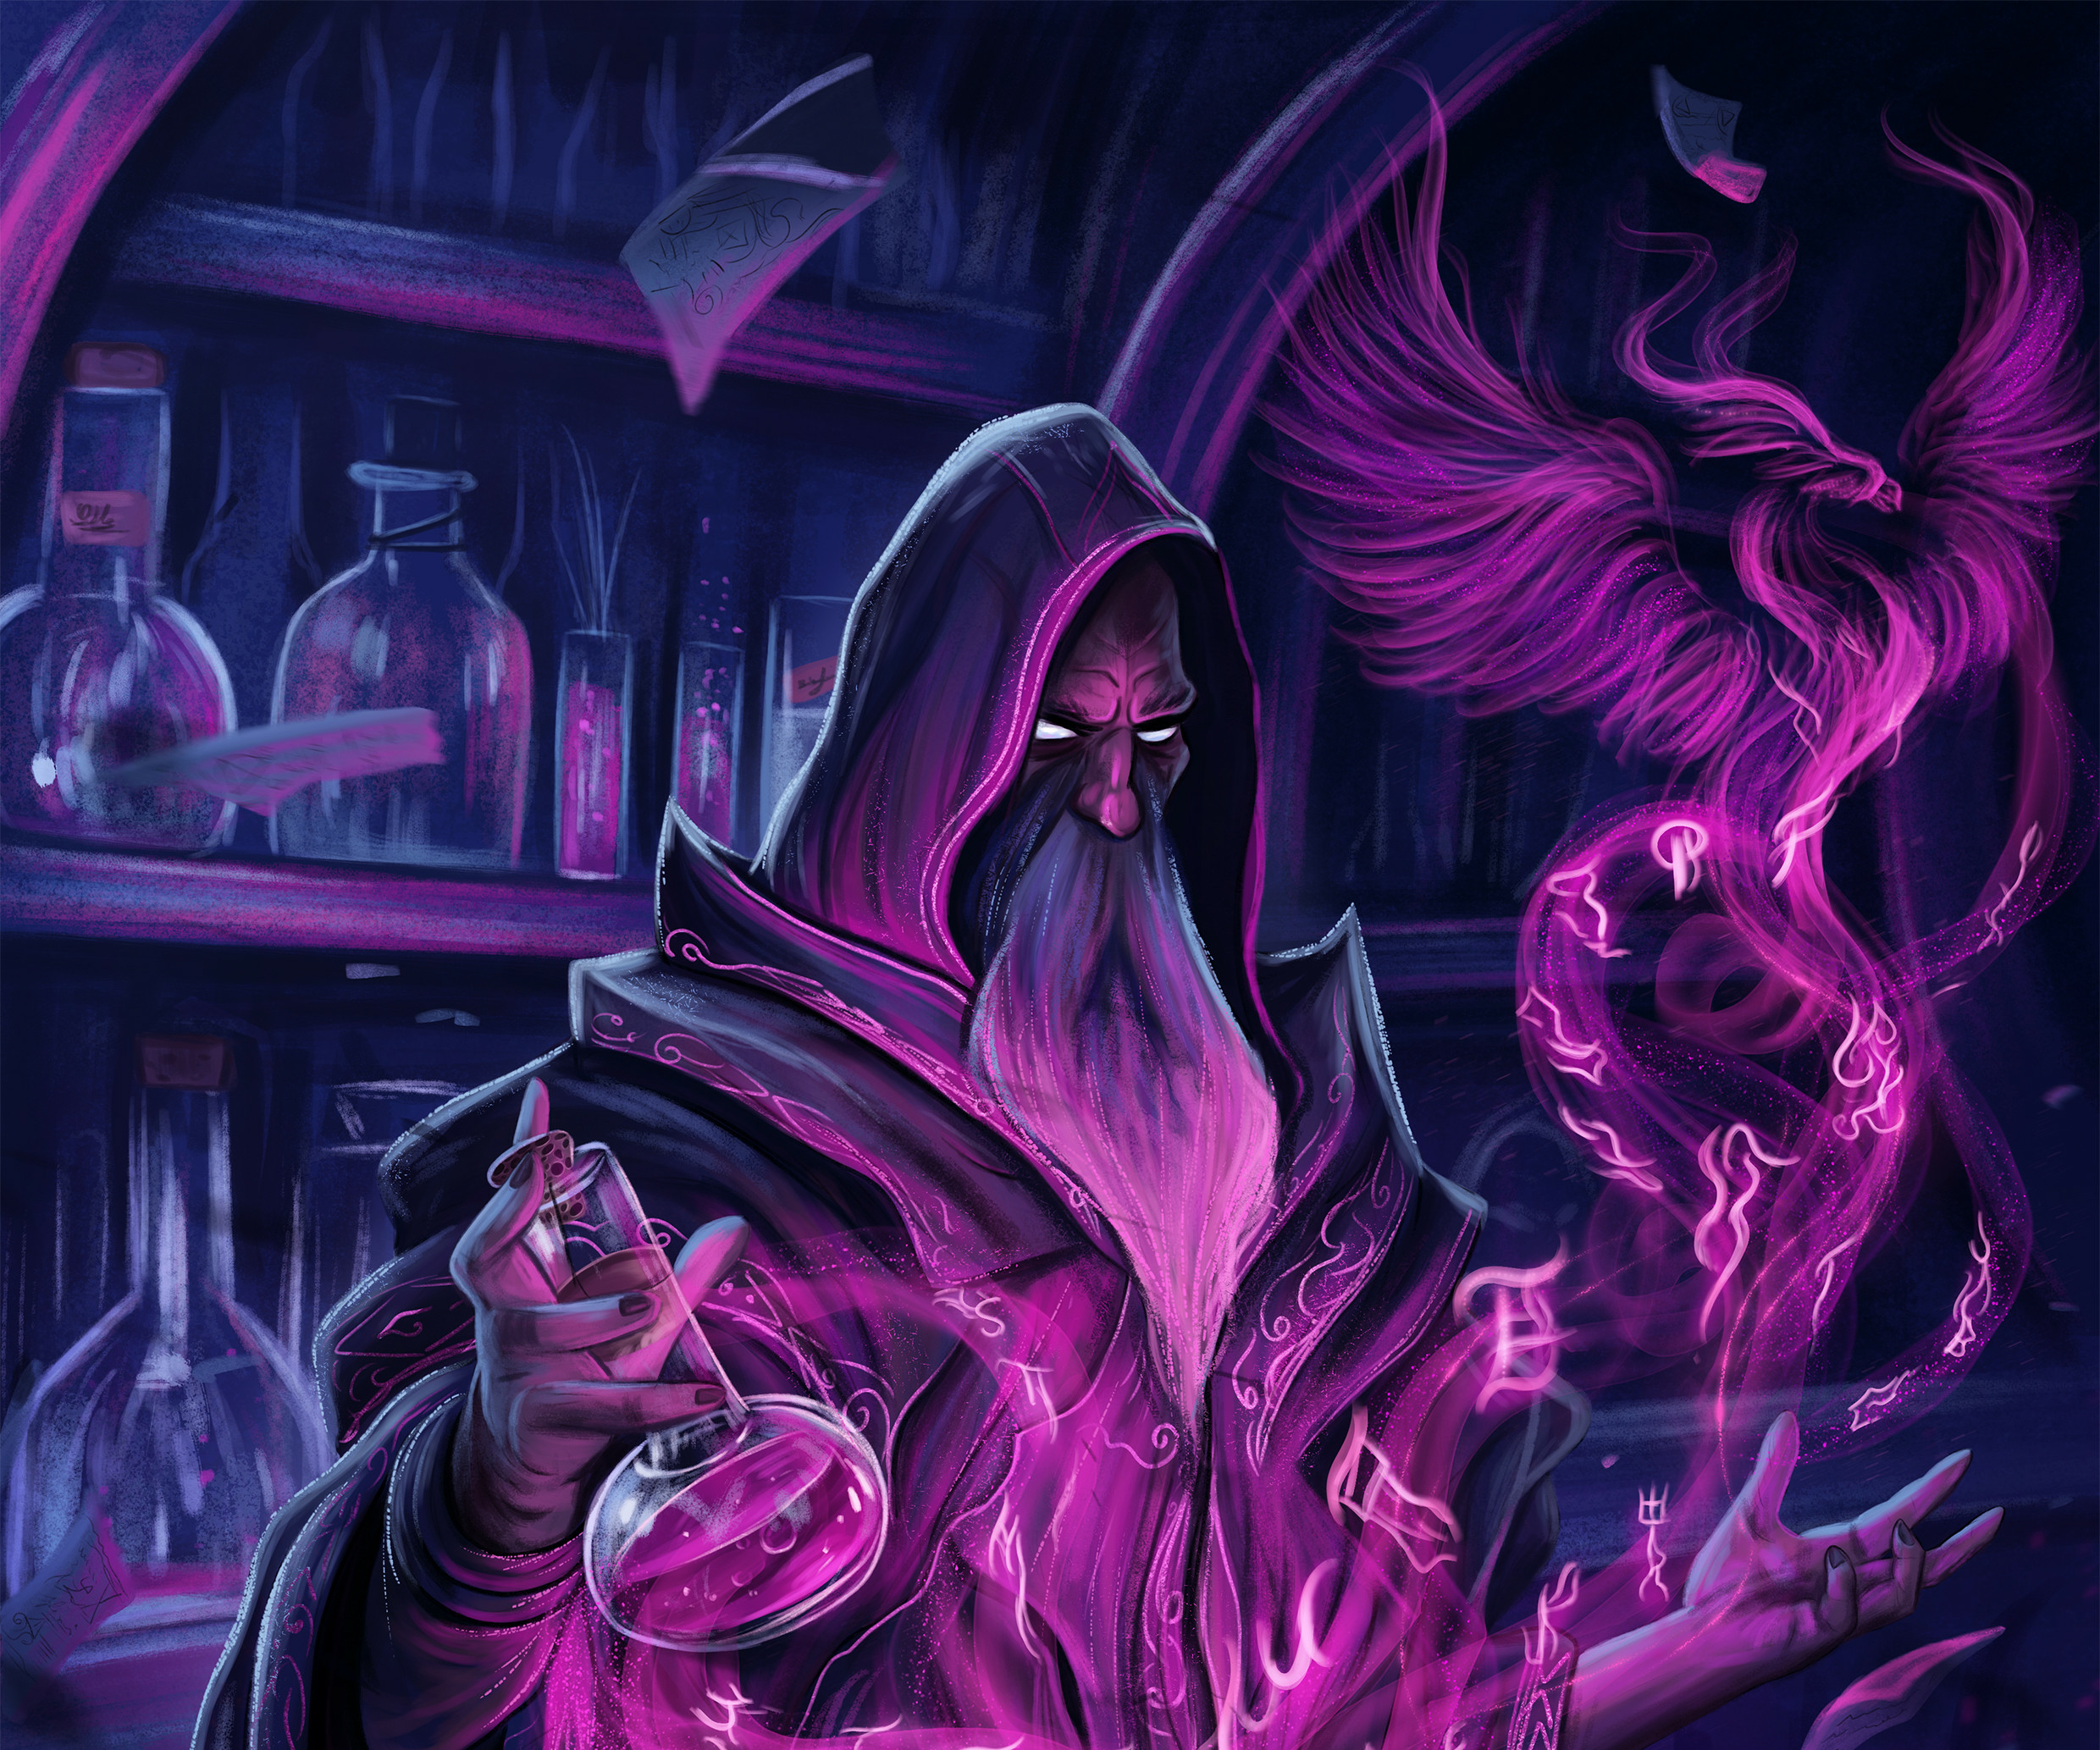 The Potions Wizard by Margaux Valonia Butet